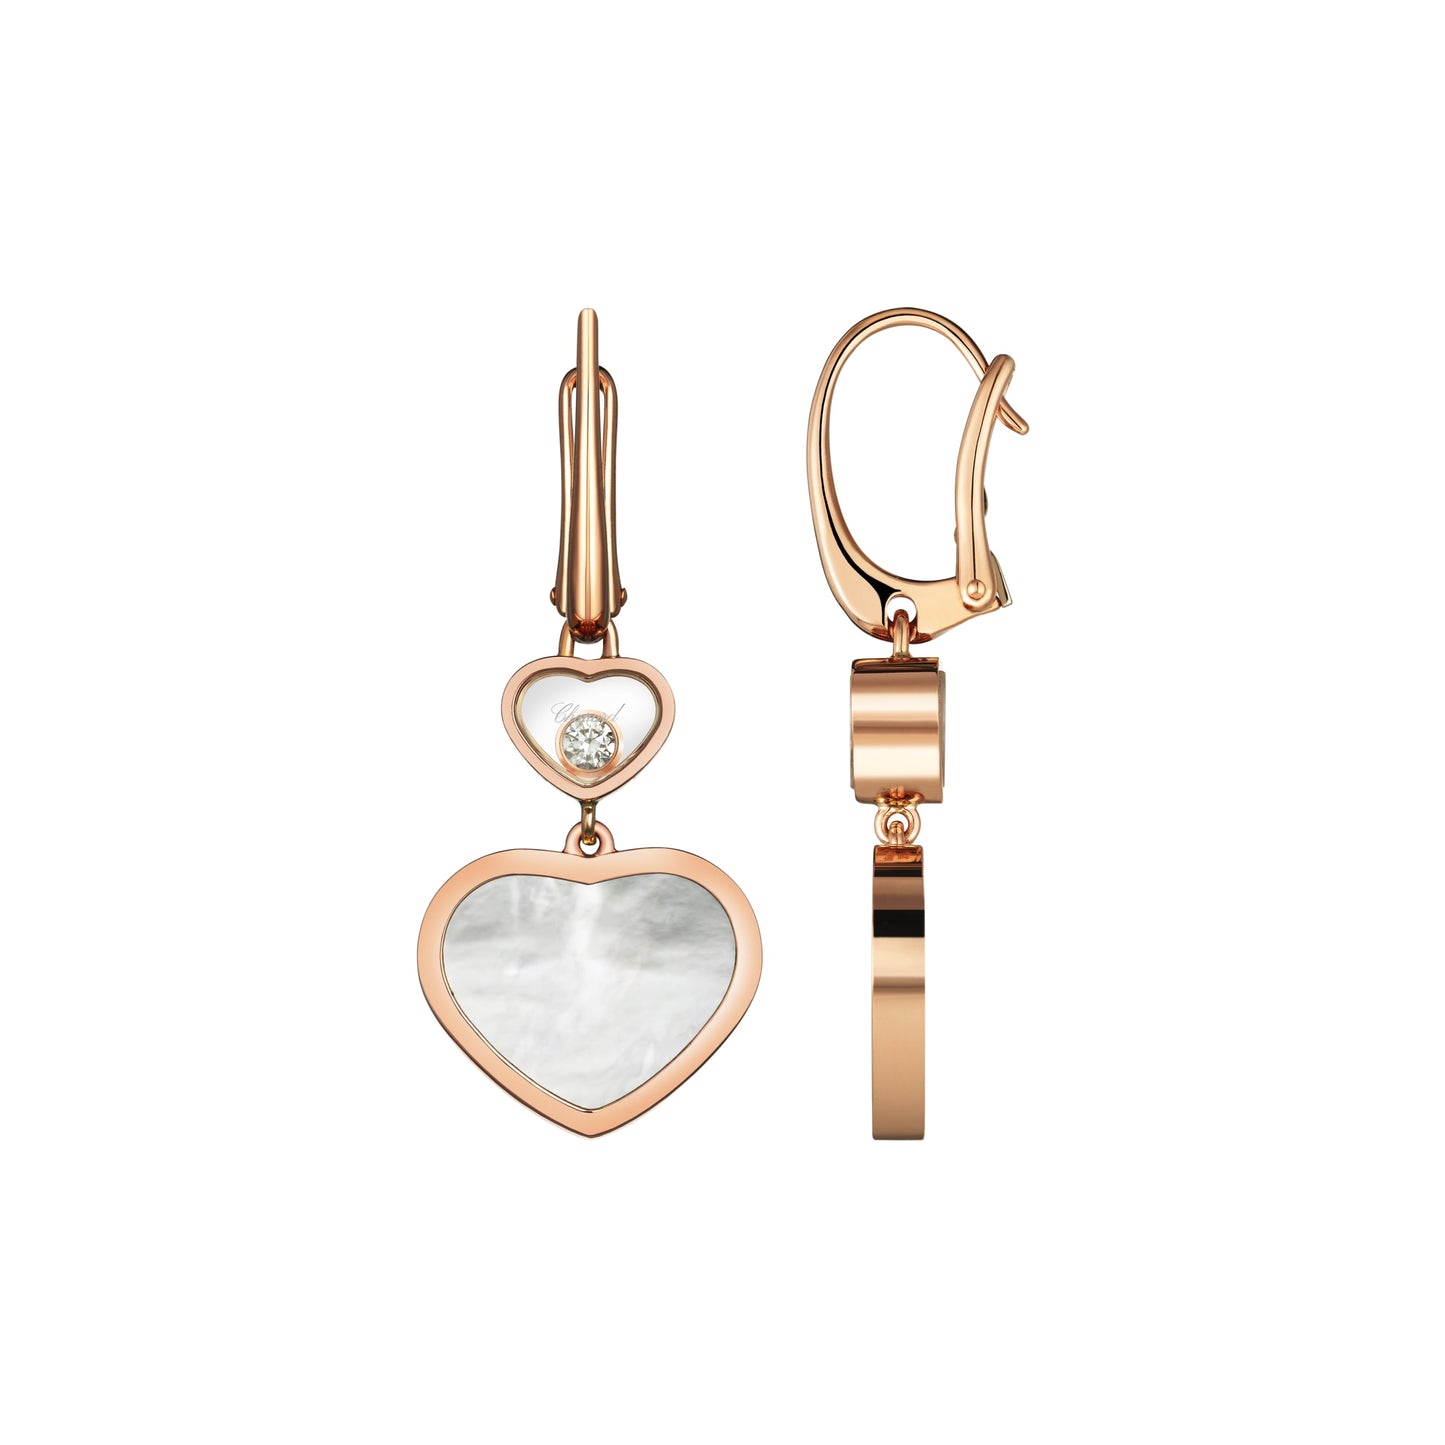 HAPPY HEARTS EARRINGS, ETHICAL ROSE GOLD, DIAMONDS, MOTHER-OF-PEARL 837482-5310